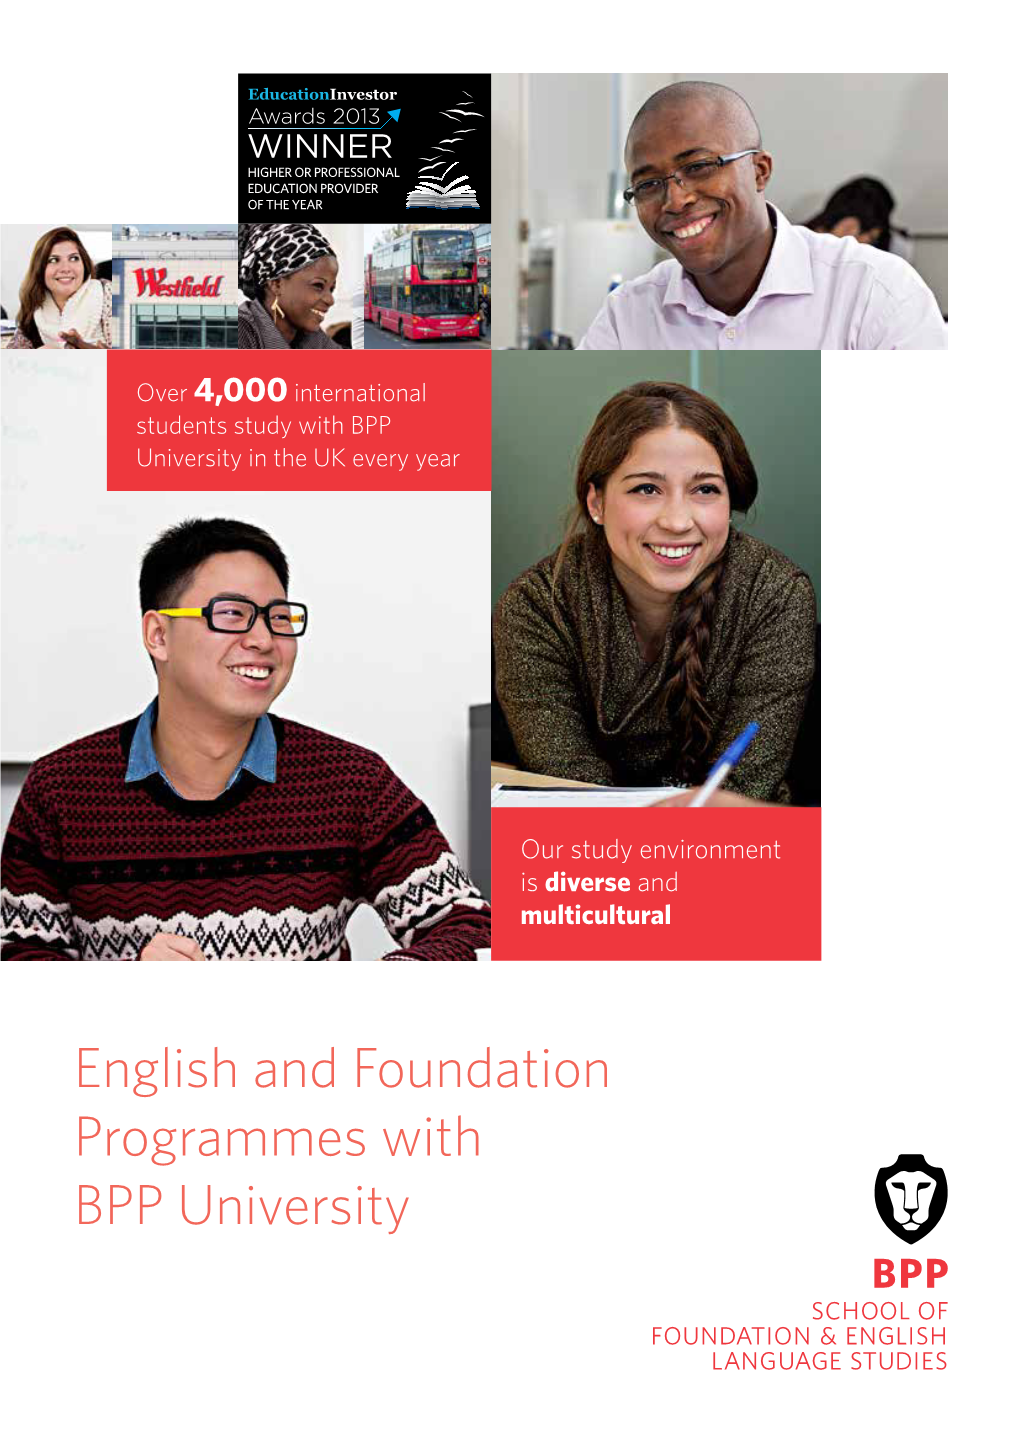 English and Foundation Programmes with BPP University